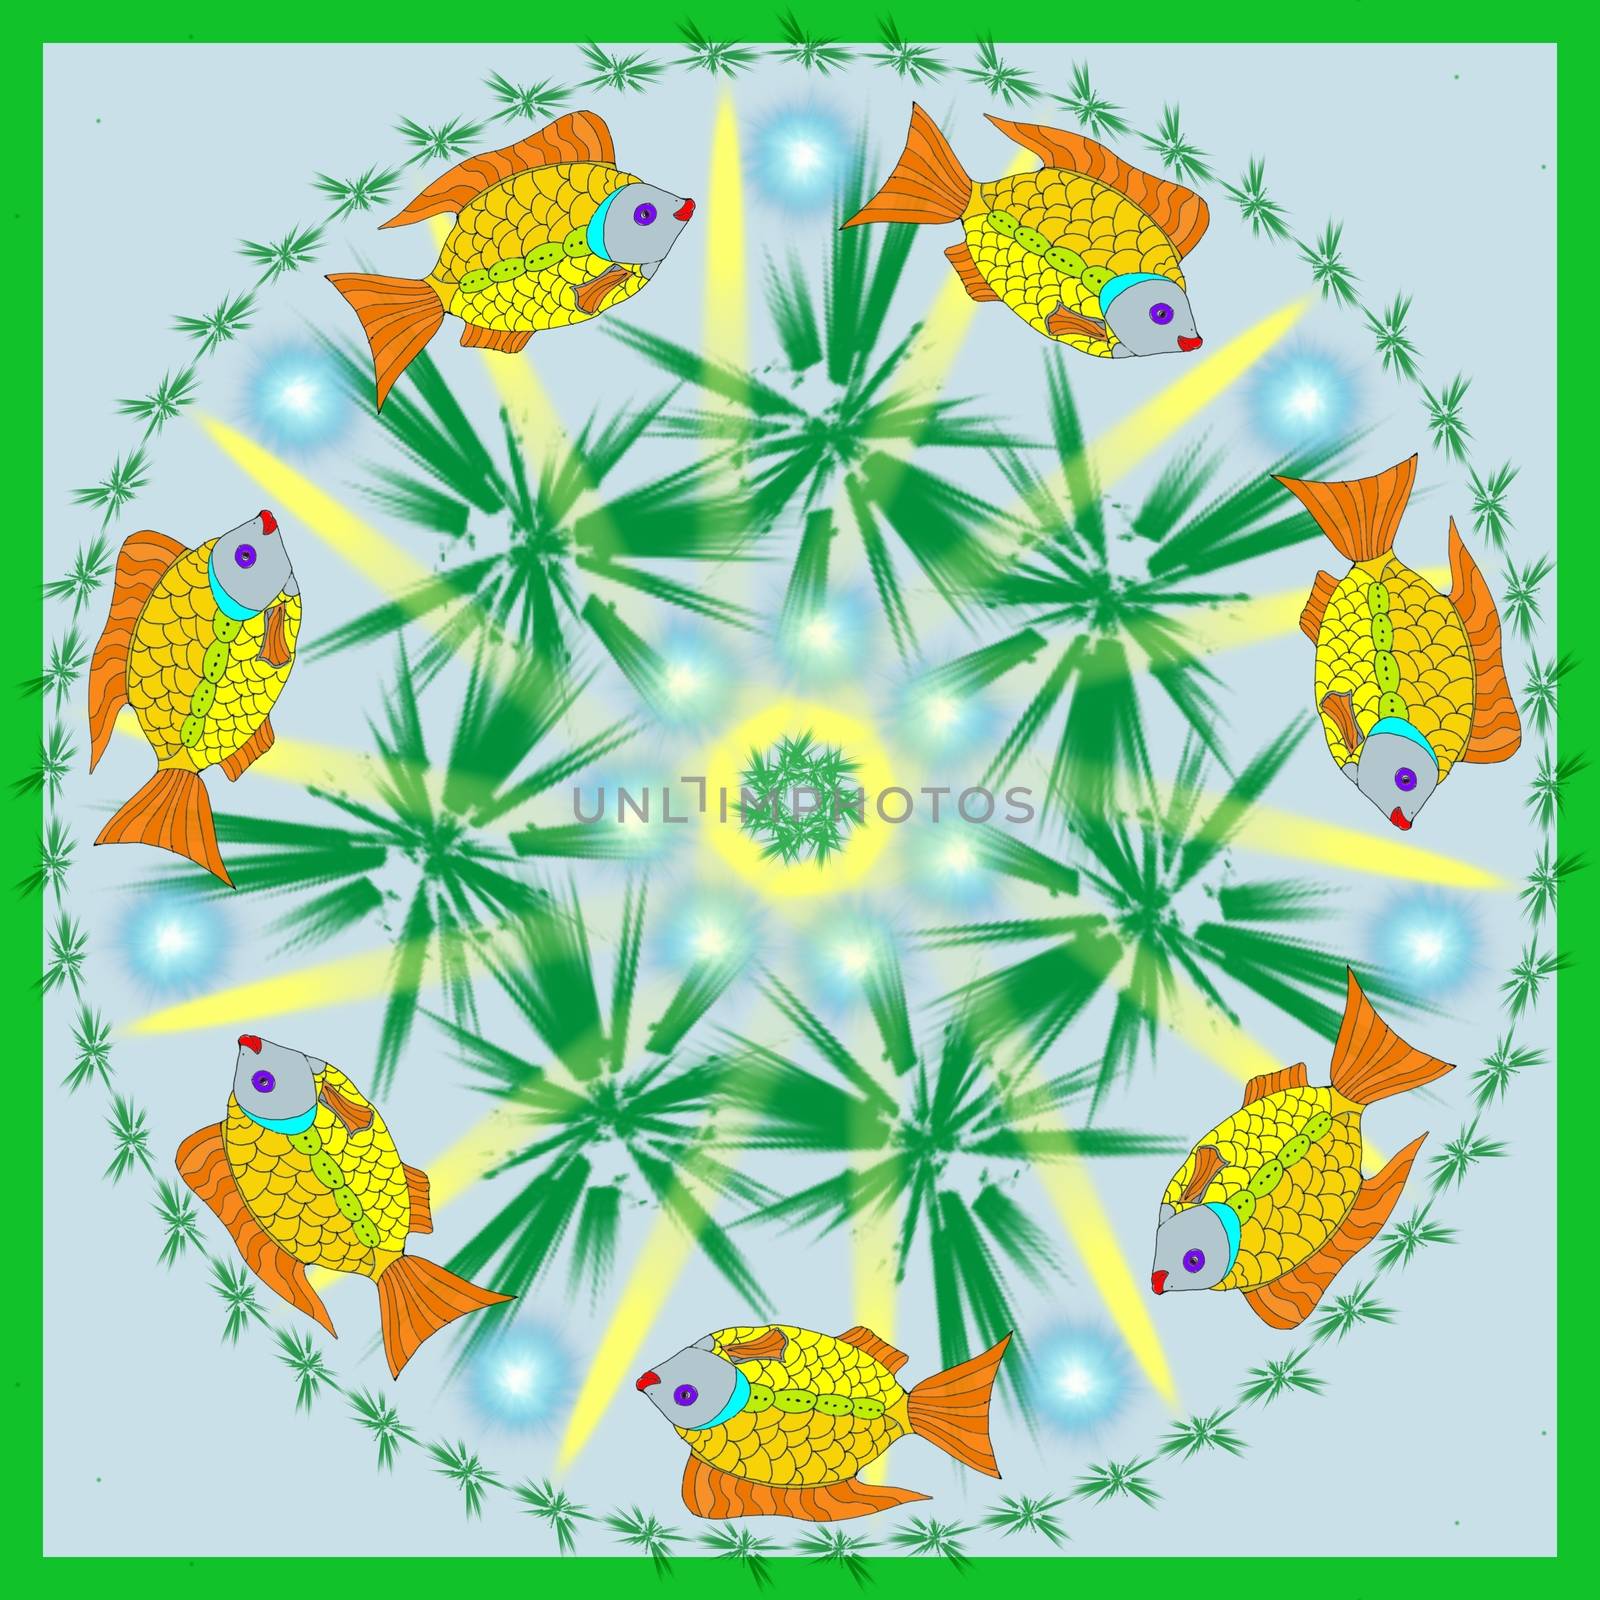 Decorative mandala with a fishes by Astronira